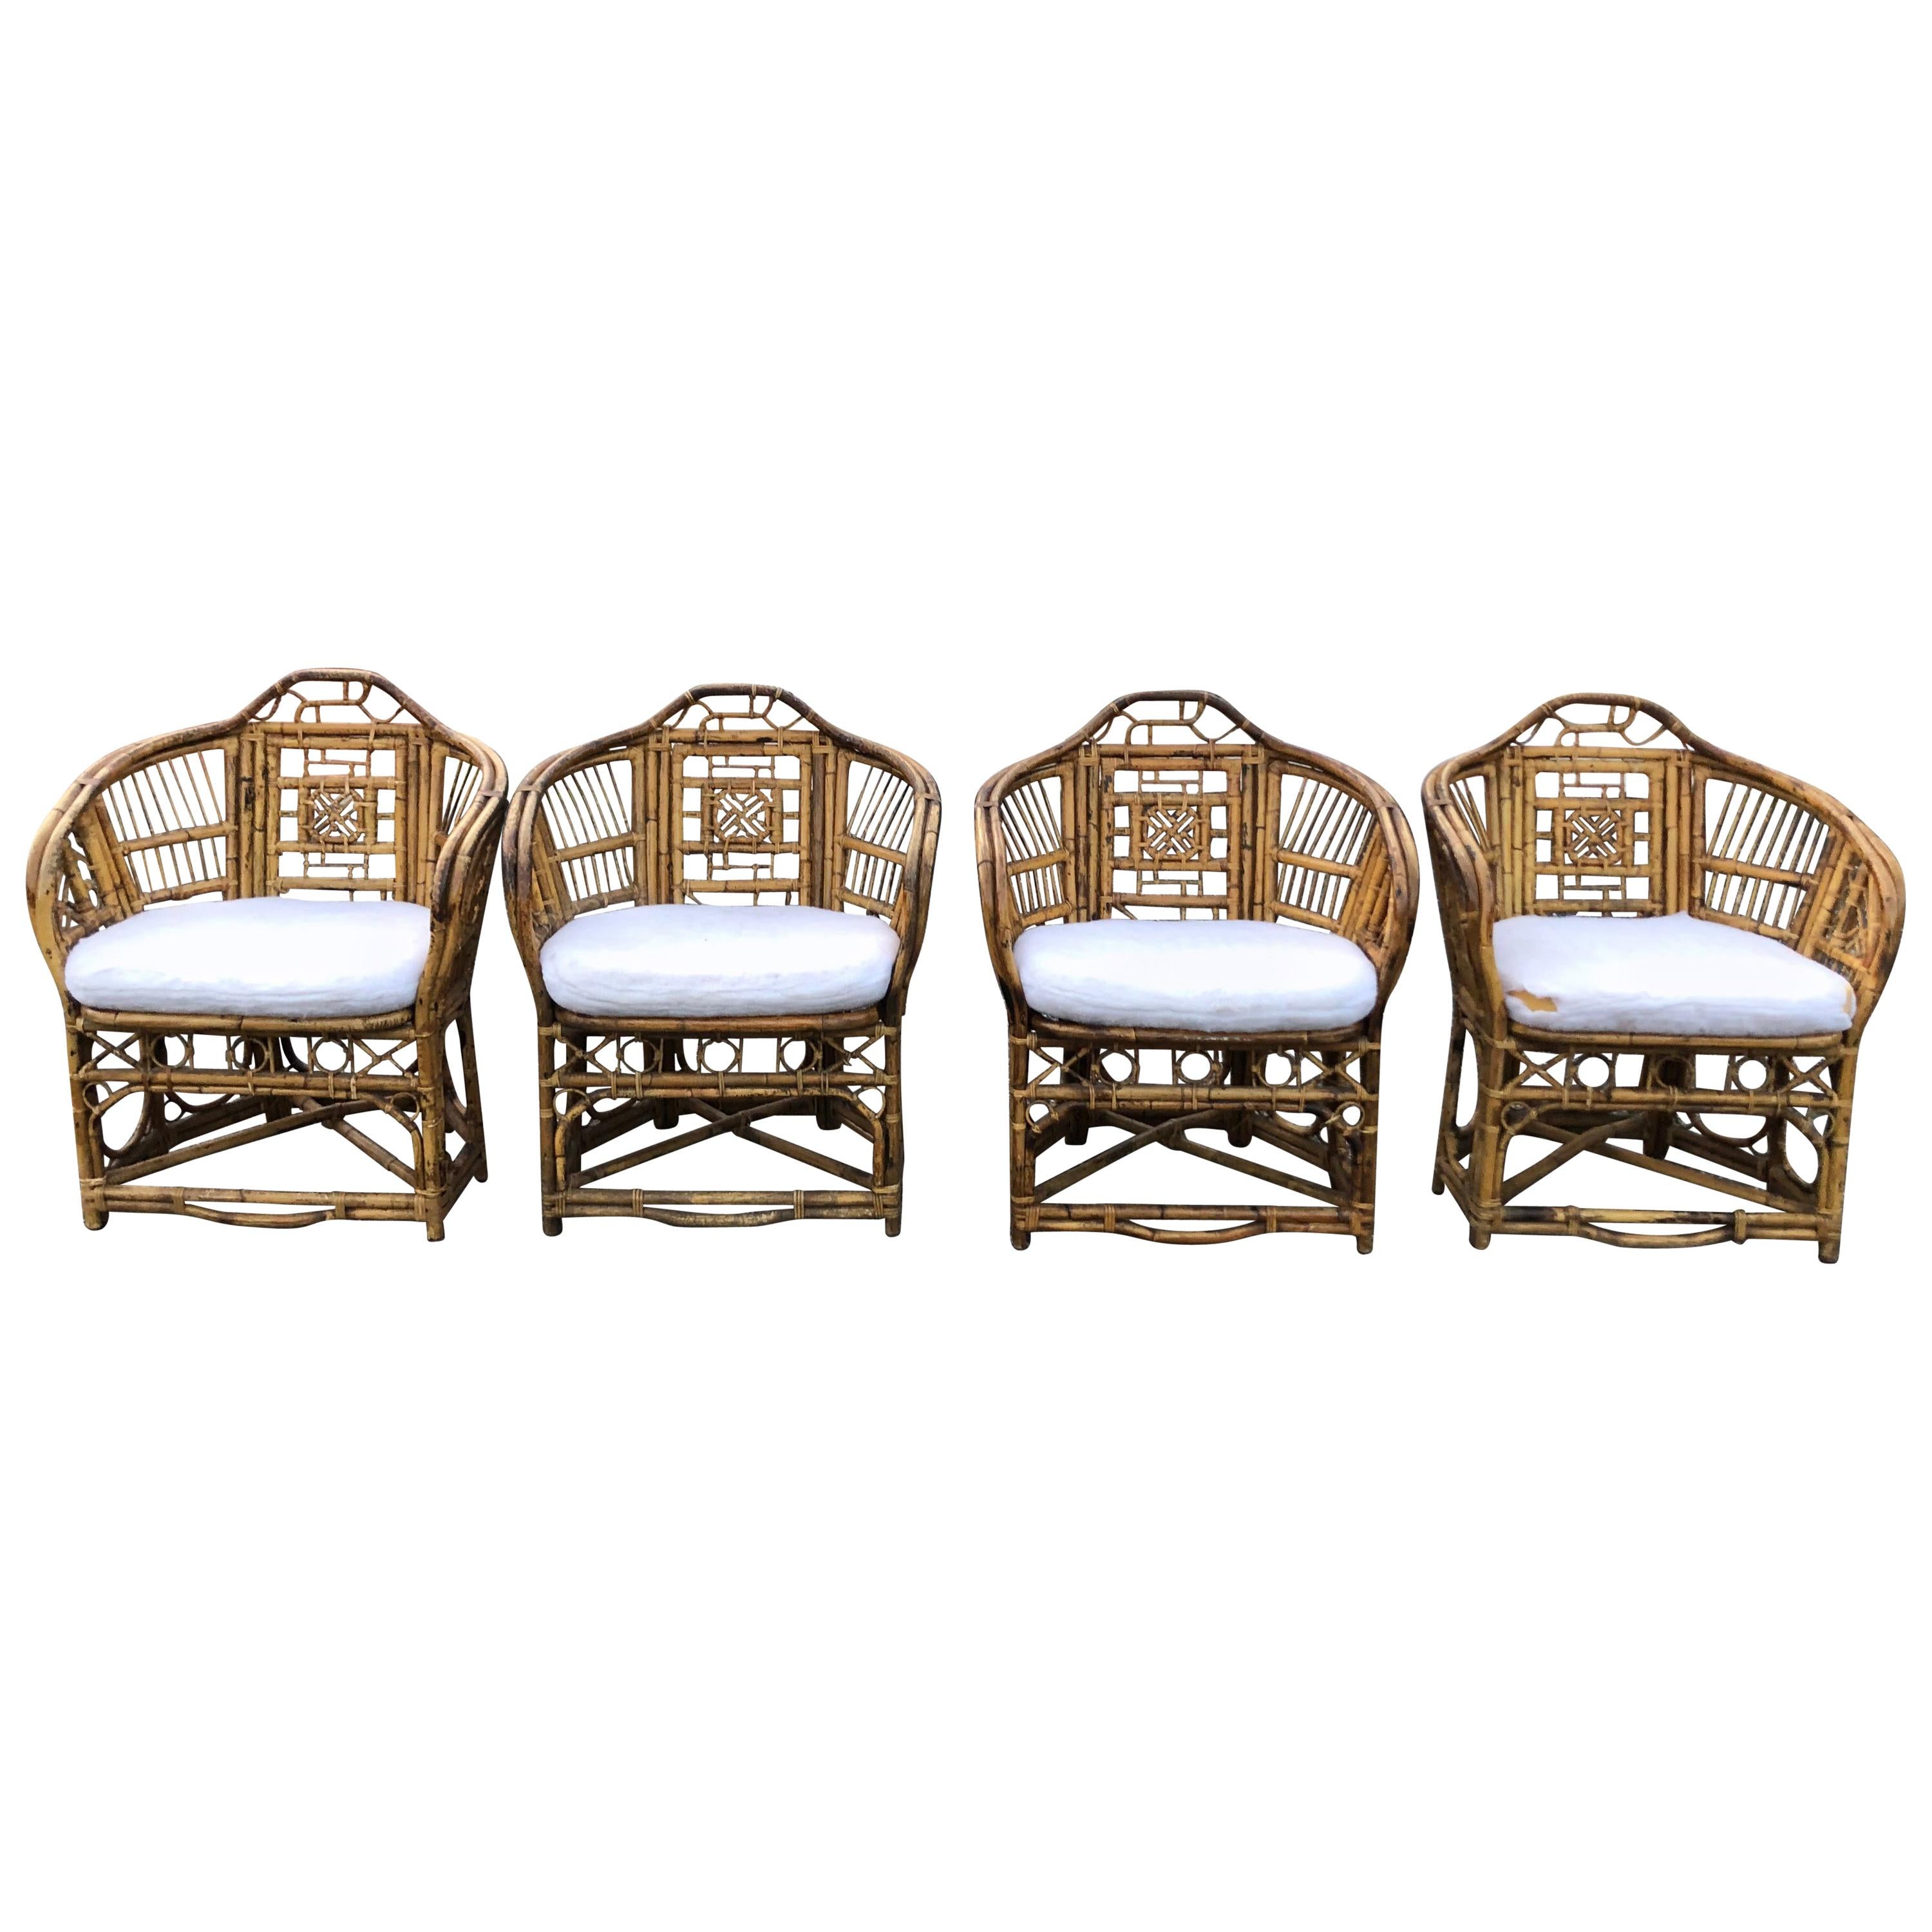 Set of Four Chinese Chippendale Style Bamboo Chairs